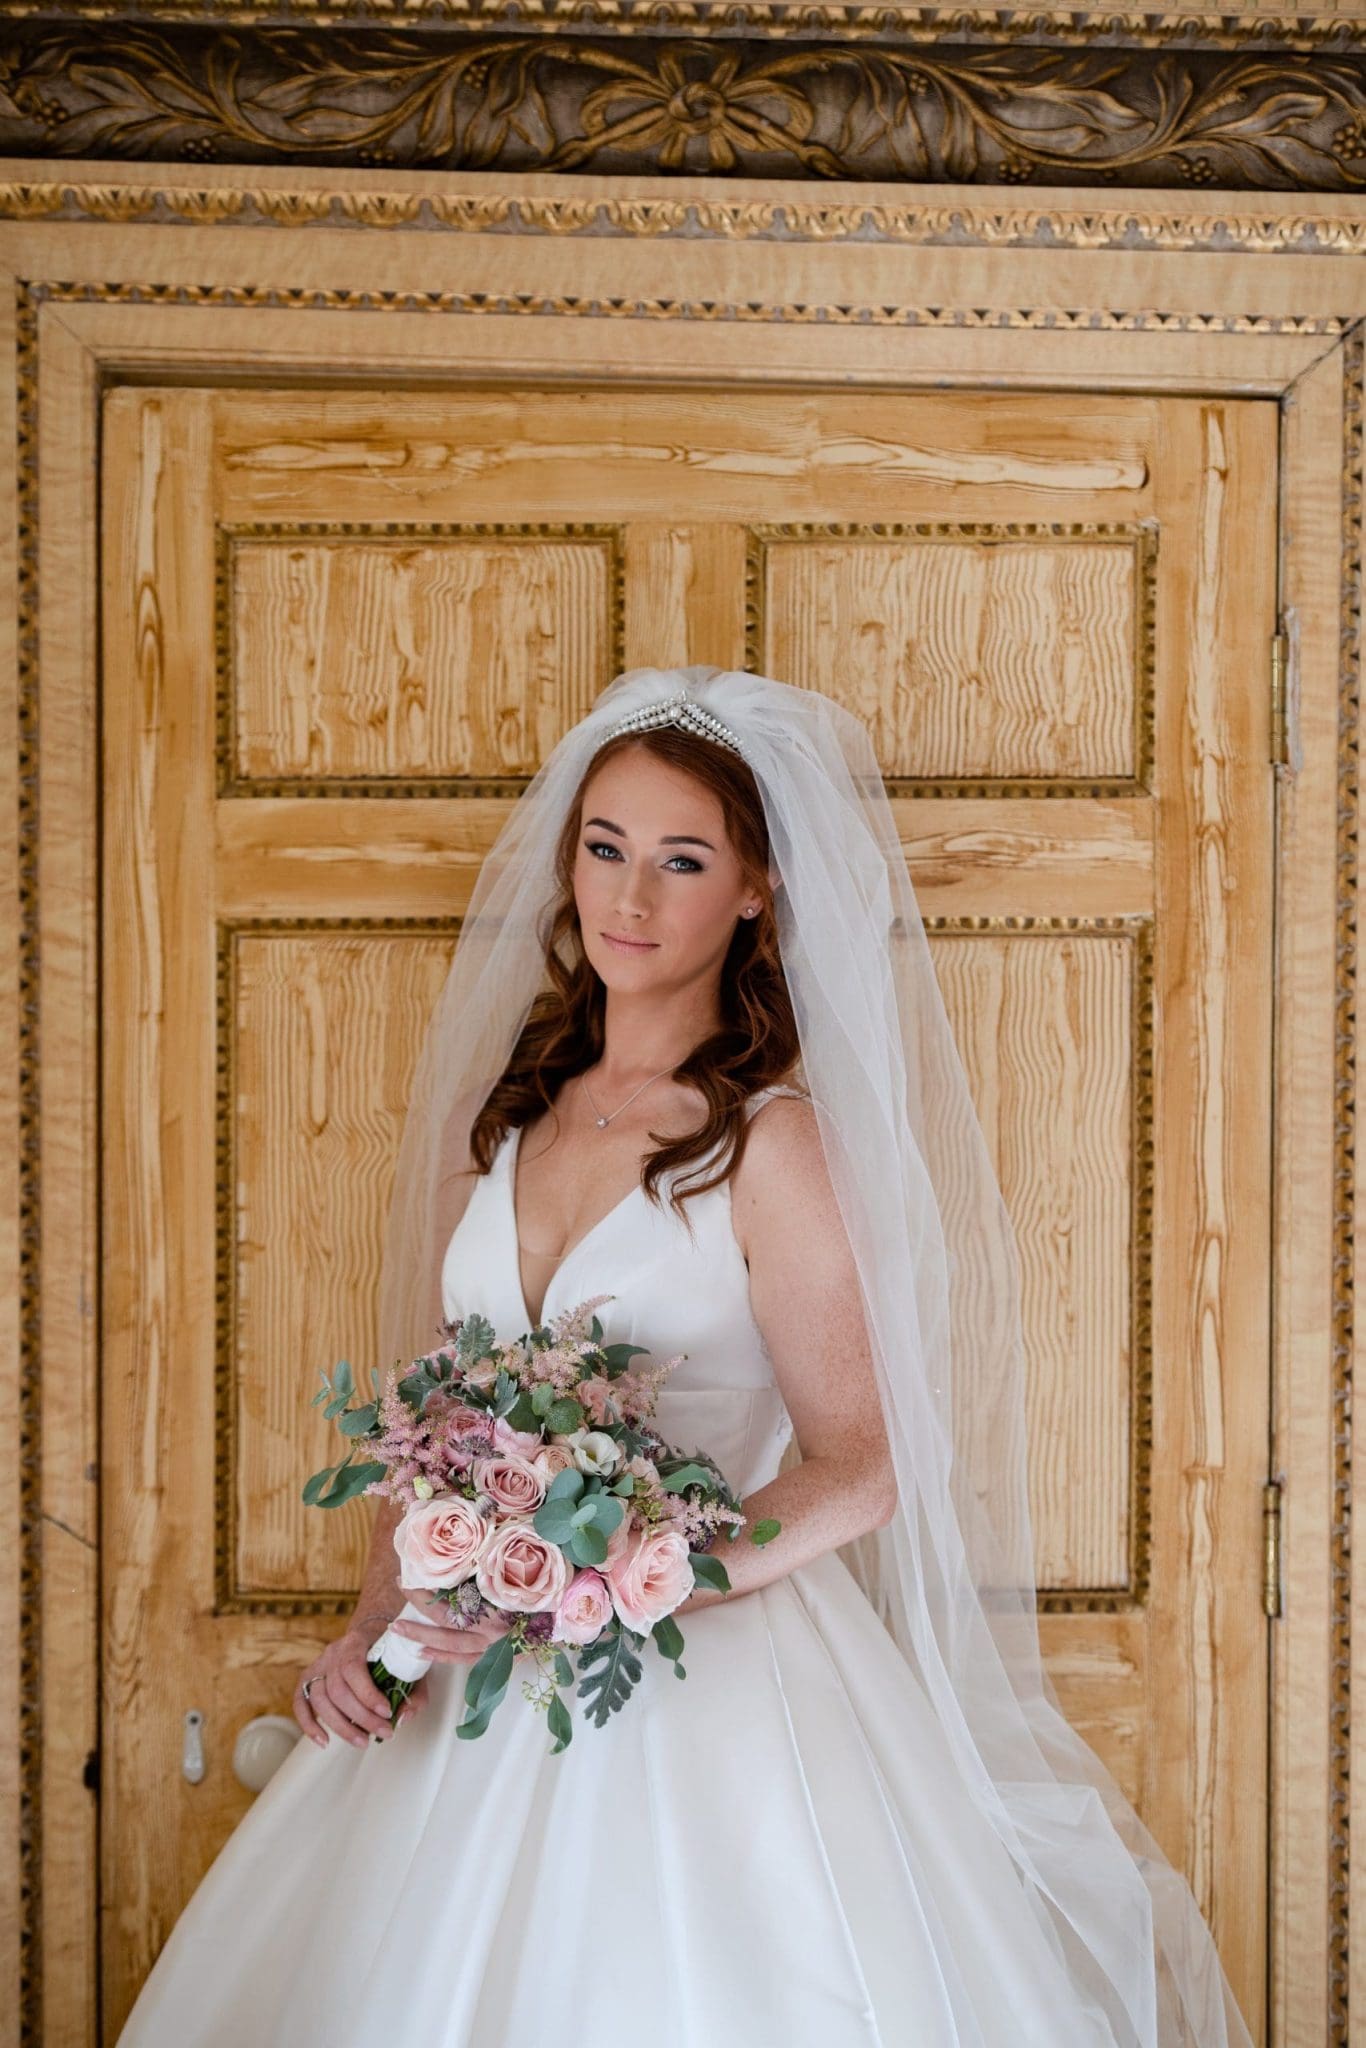 Wedding Photography of a bride at Gosfield Hall, Essex